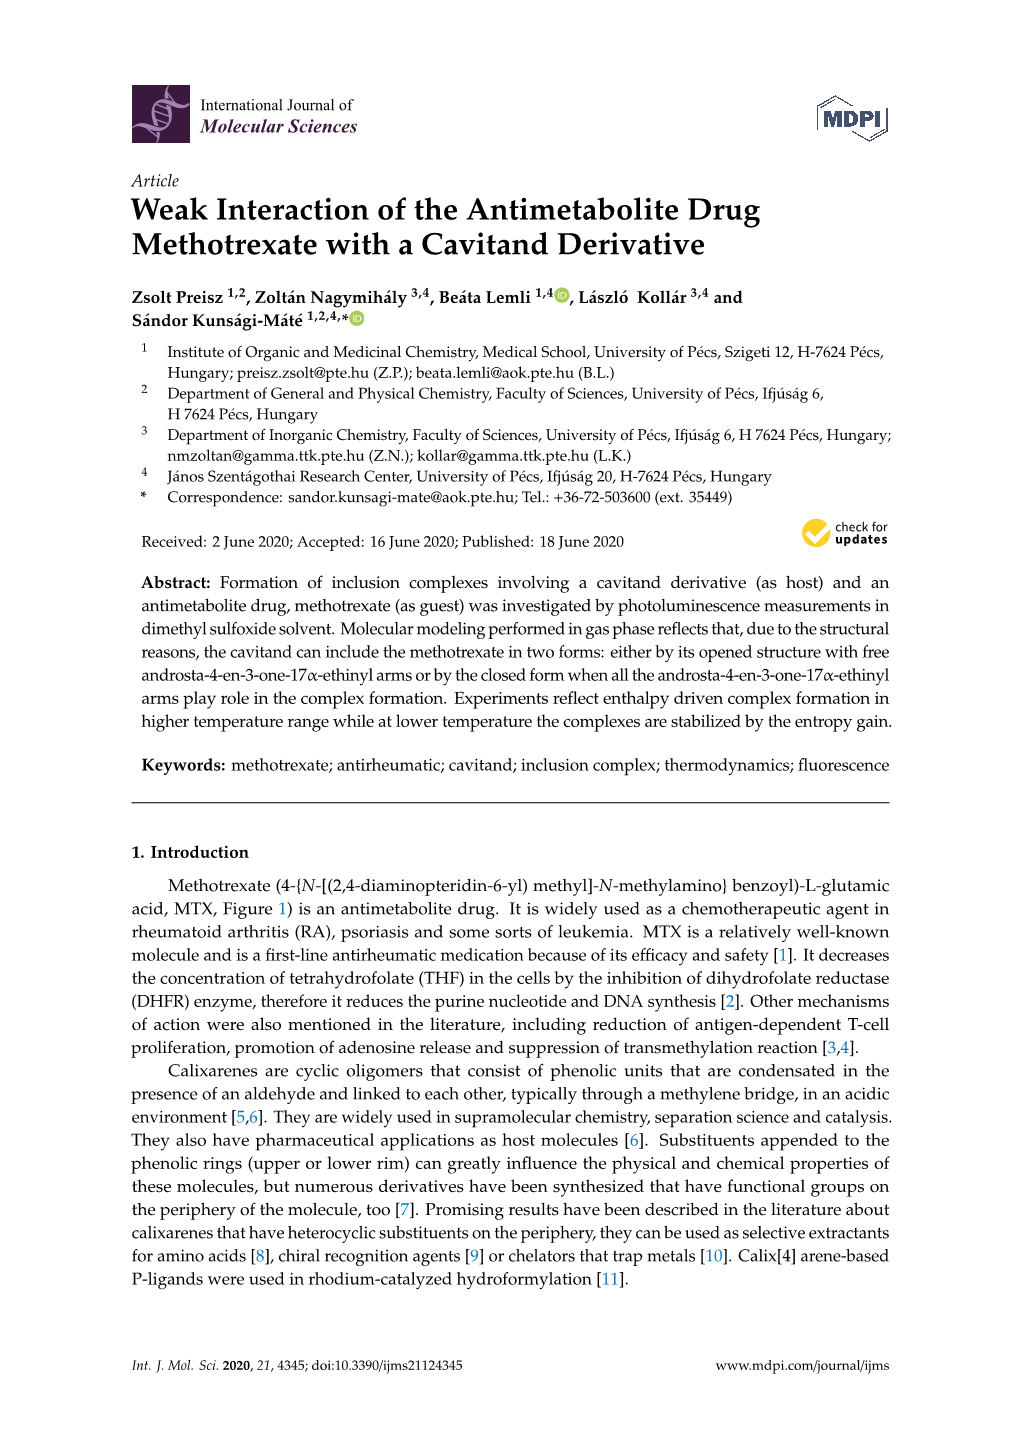 Weak Interaction of the Antimetabolite Drug Methotrexate with a Cavitand Derivative